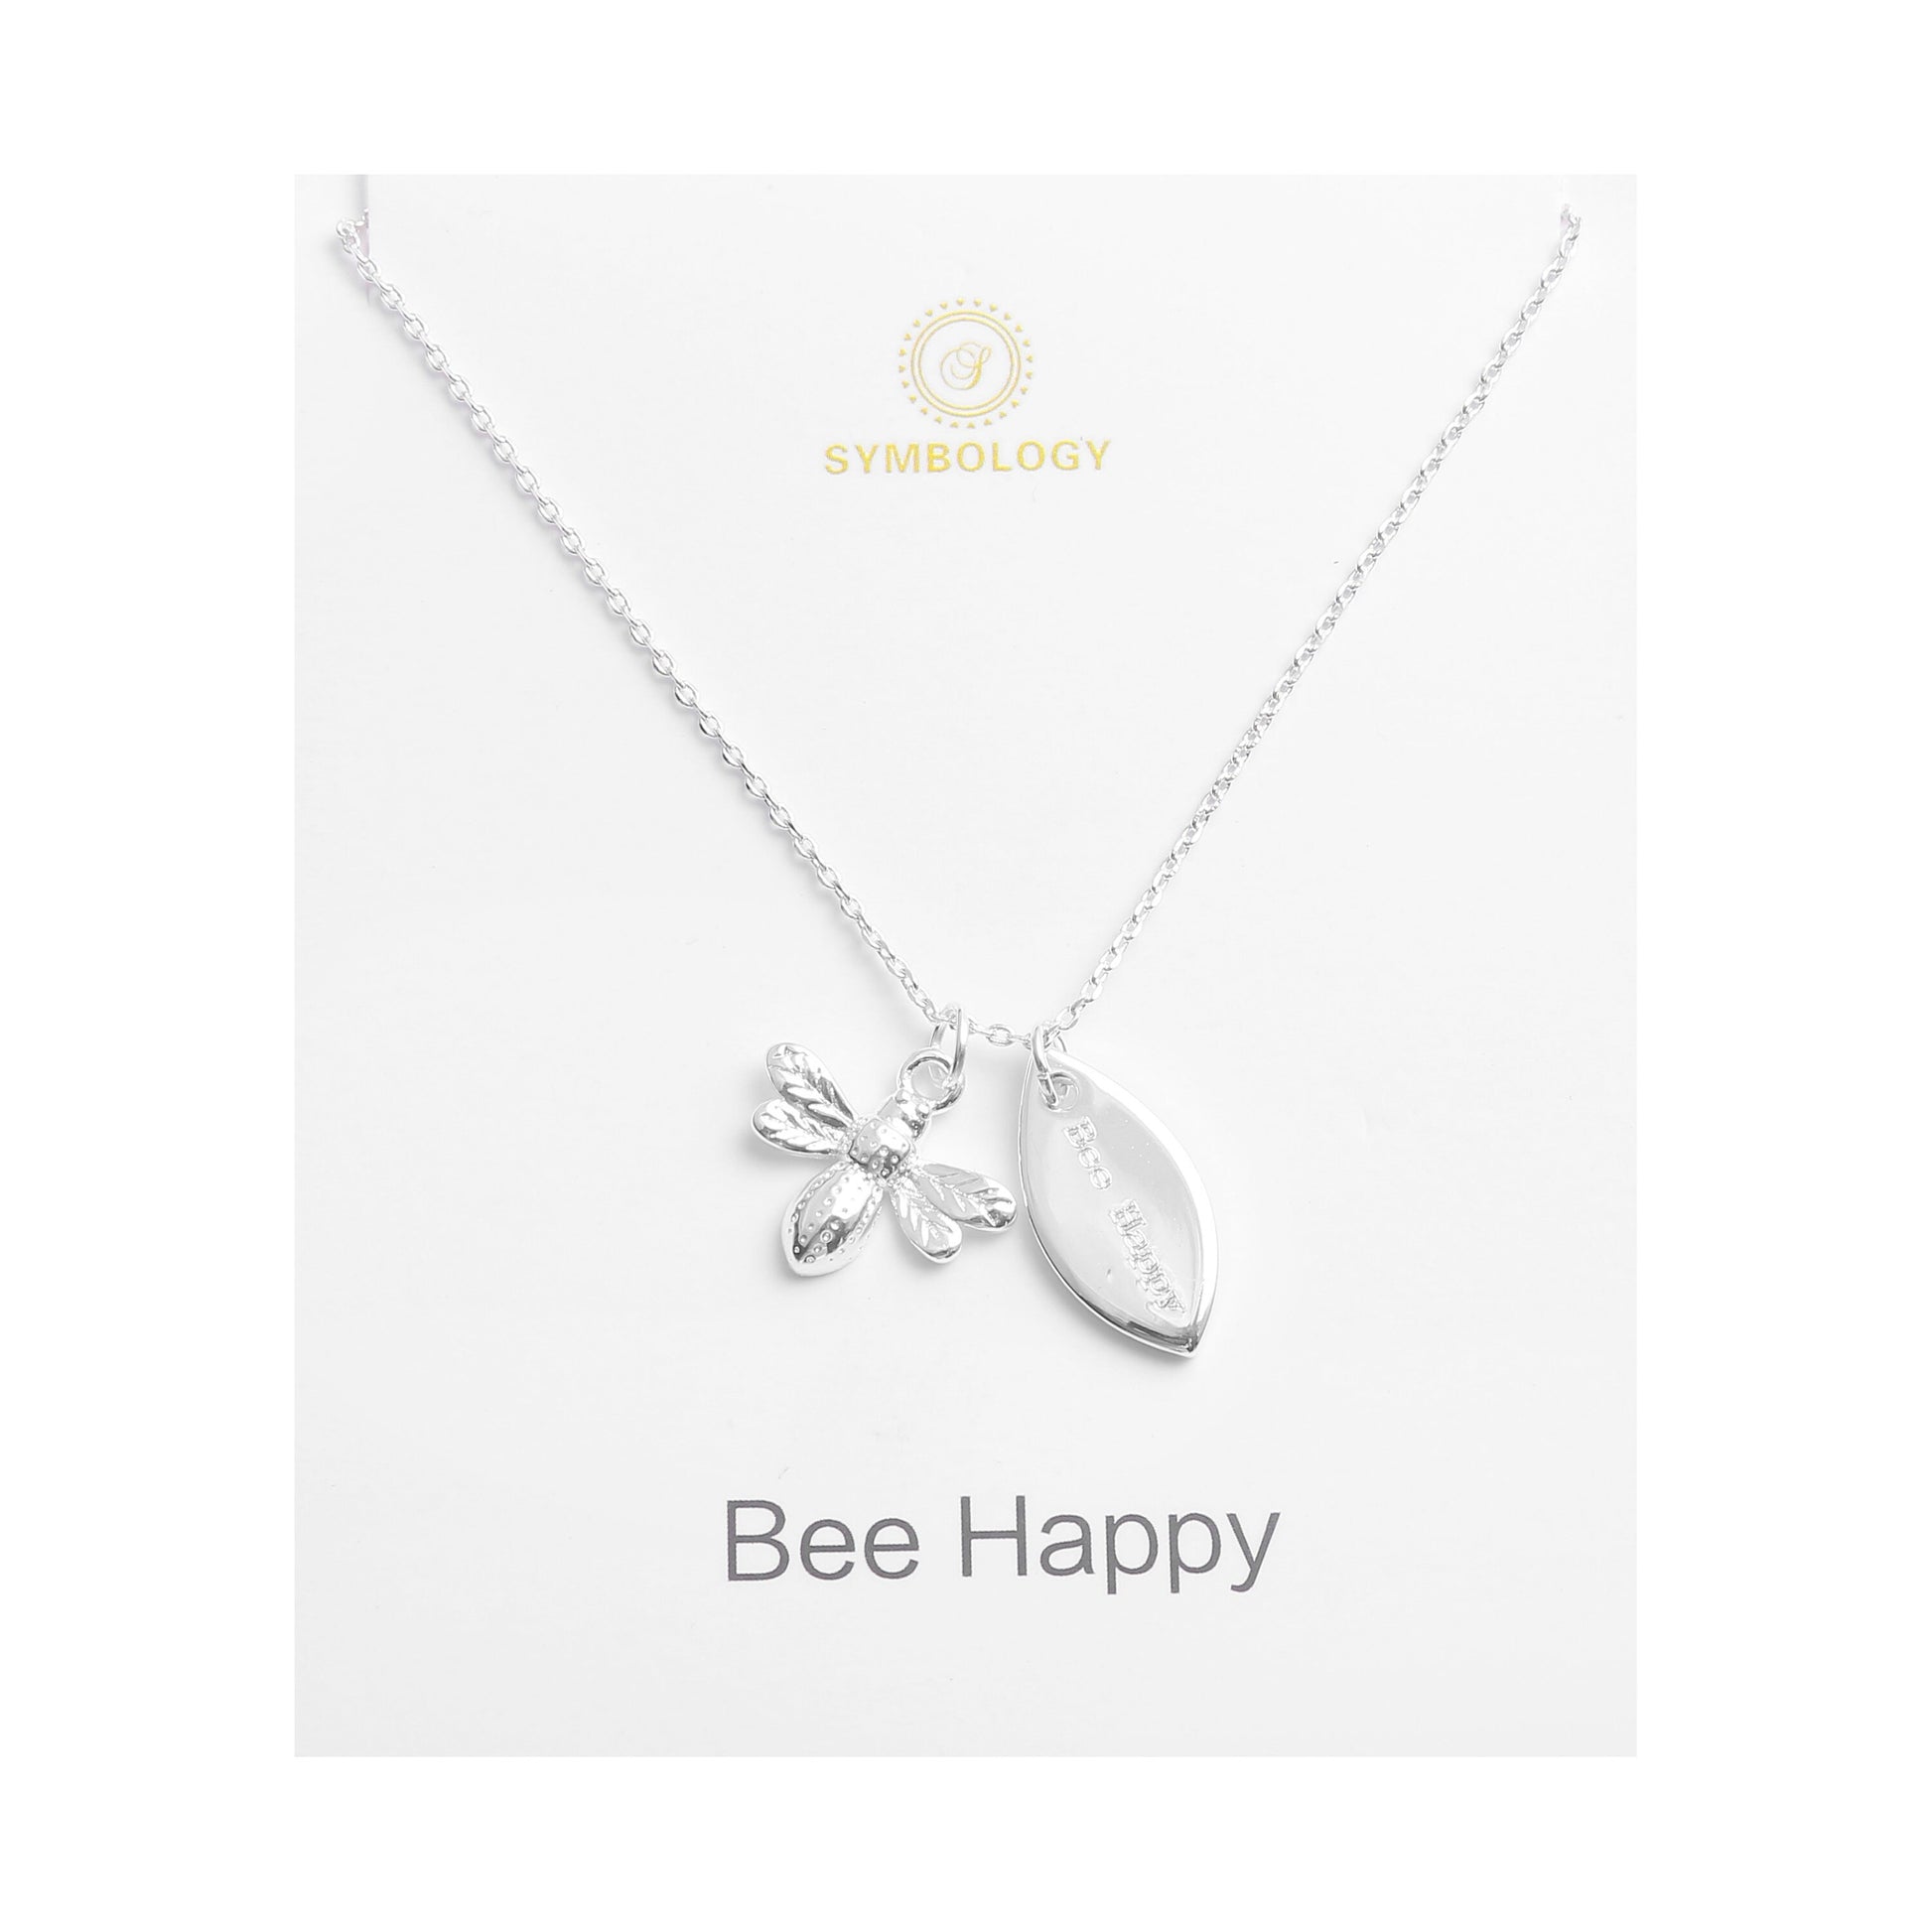 Personalised Bee Initial Pendant Necklace, Silver Bee Charm Necklace, Birthstone Initial Pendant, Sentimental Gift for Women, Gift for Her,